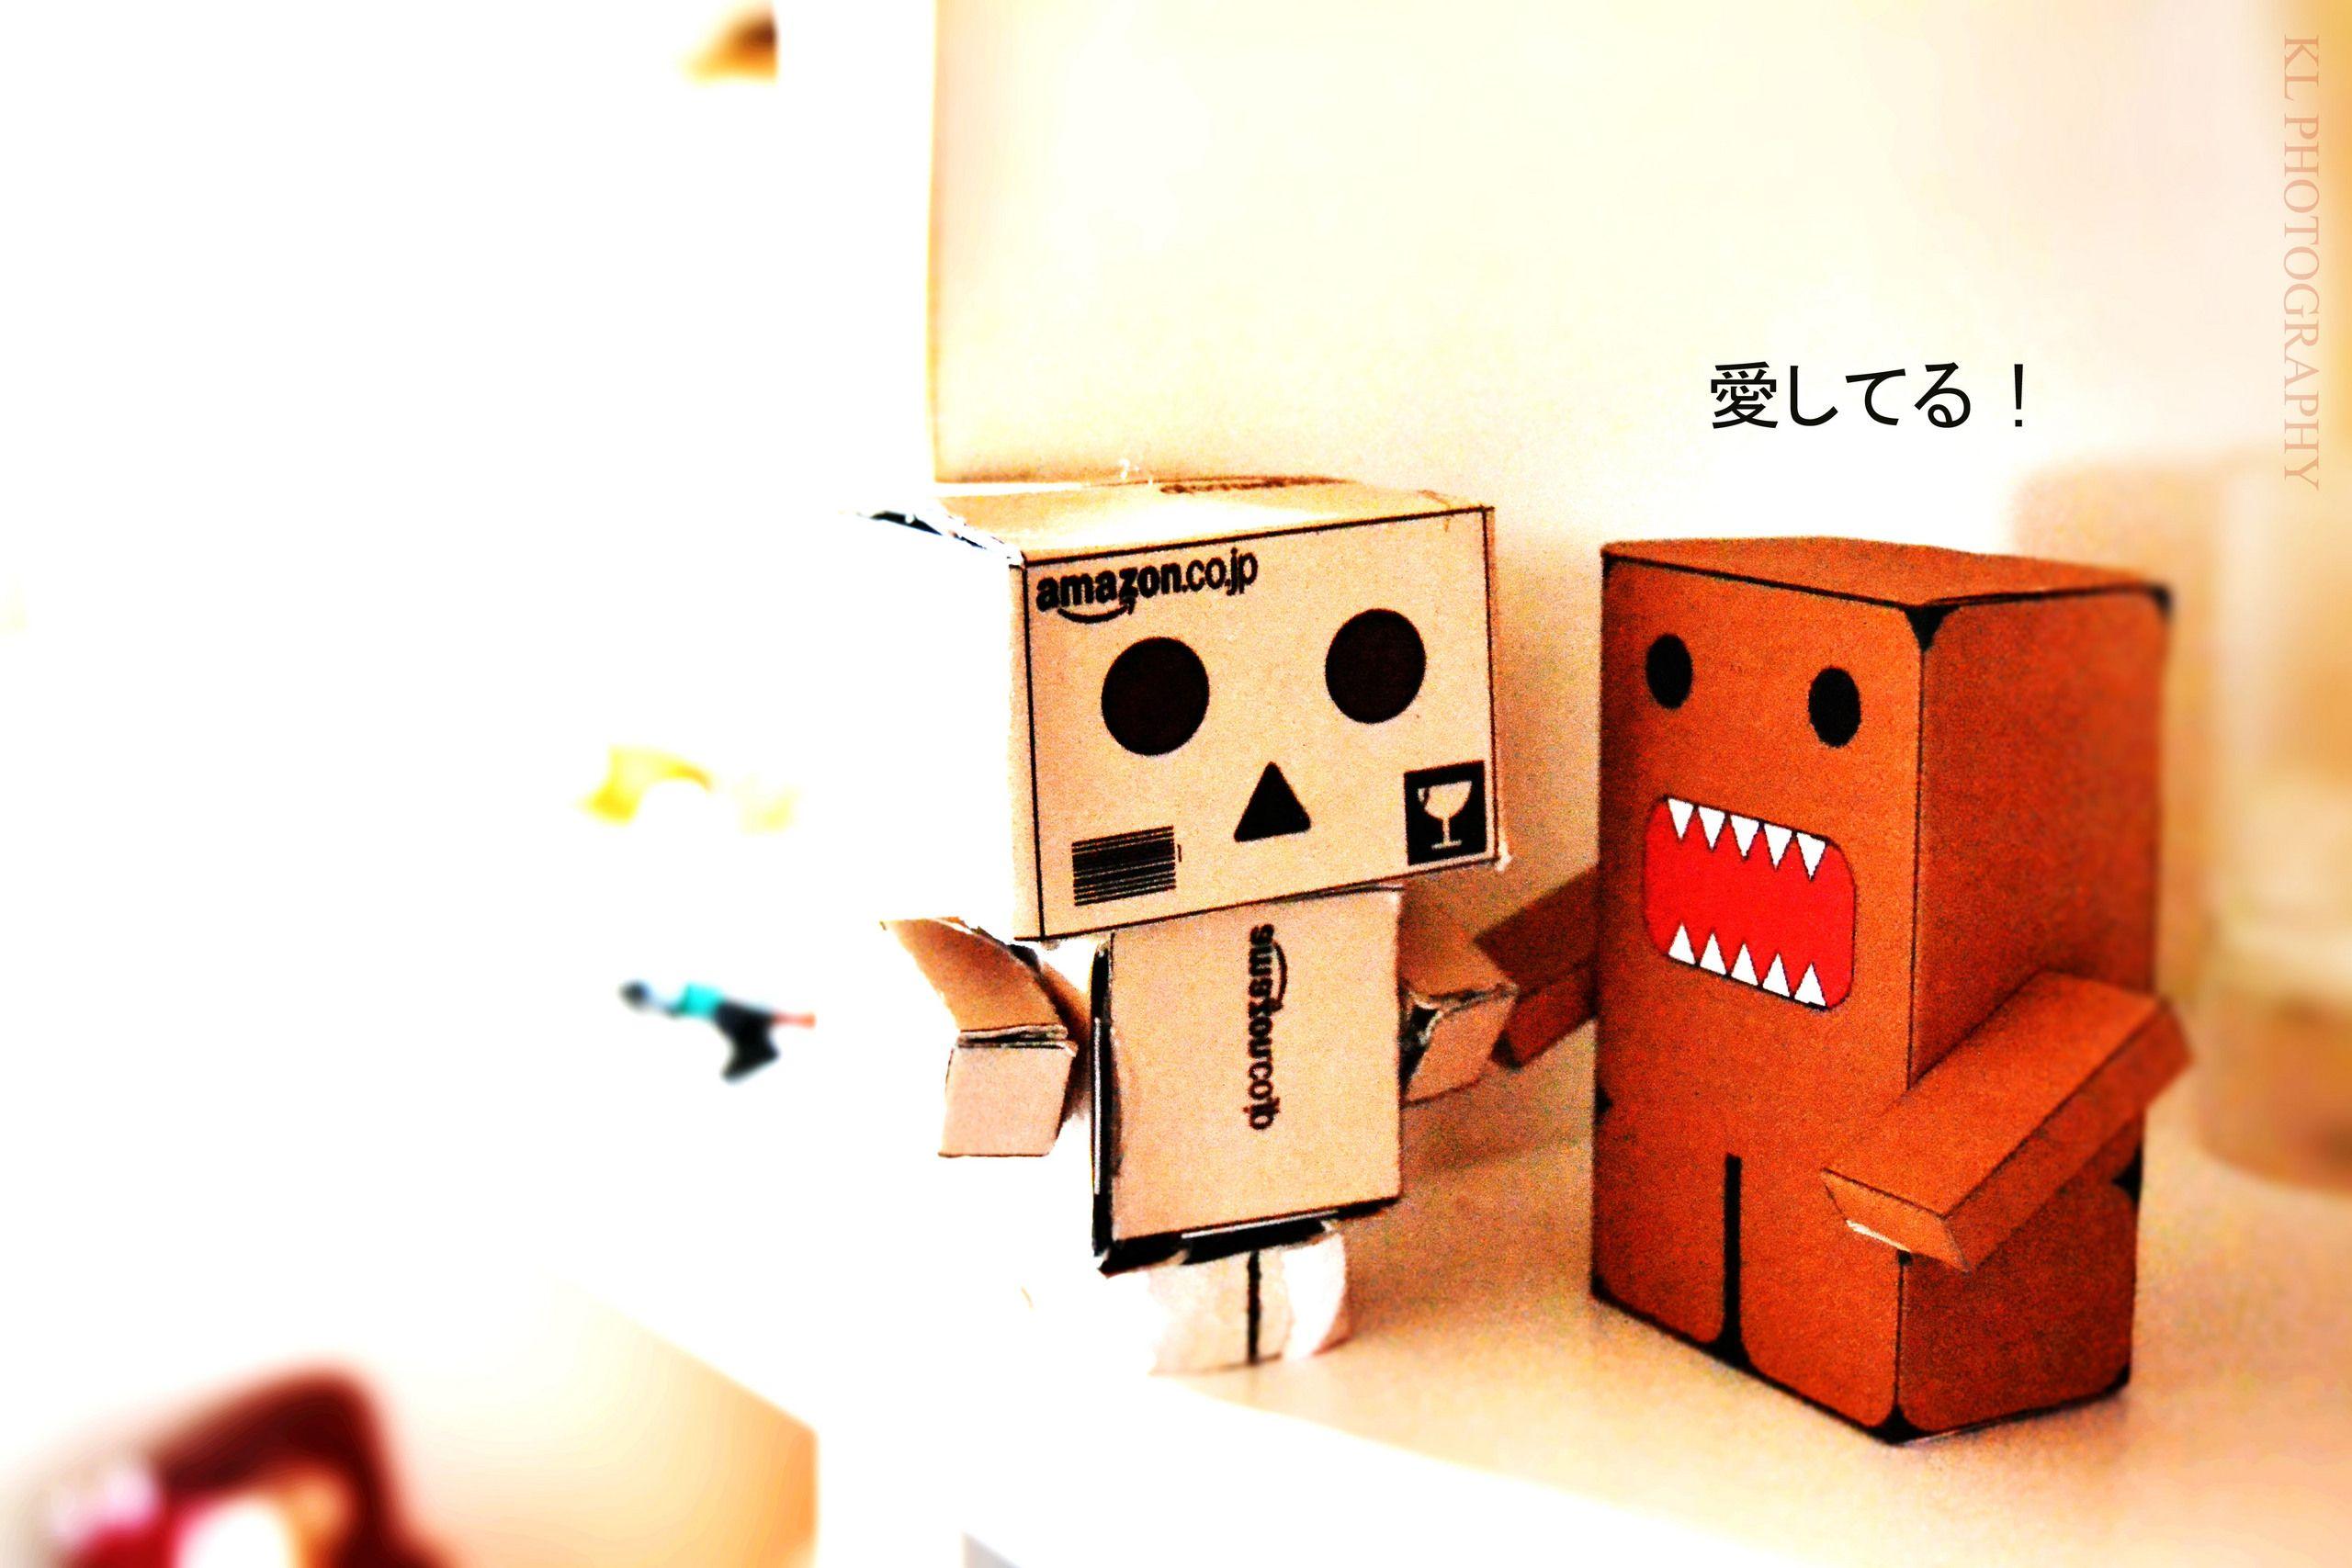 Danbo image danbo and domo fall in love HD wallpaper and background